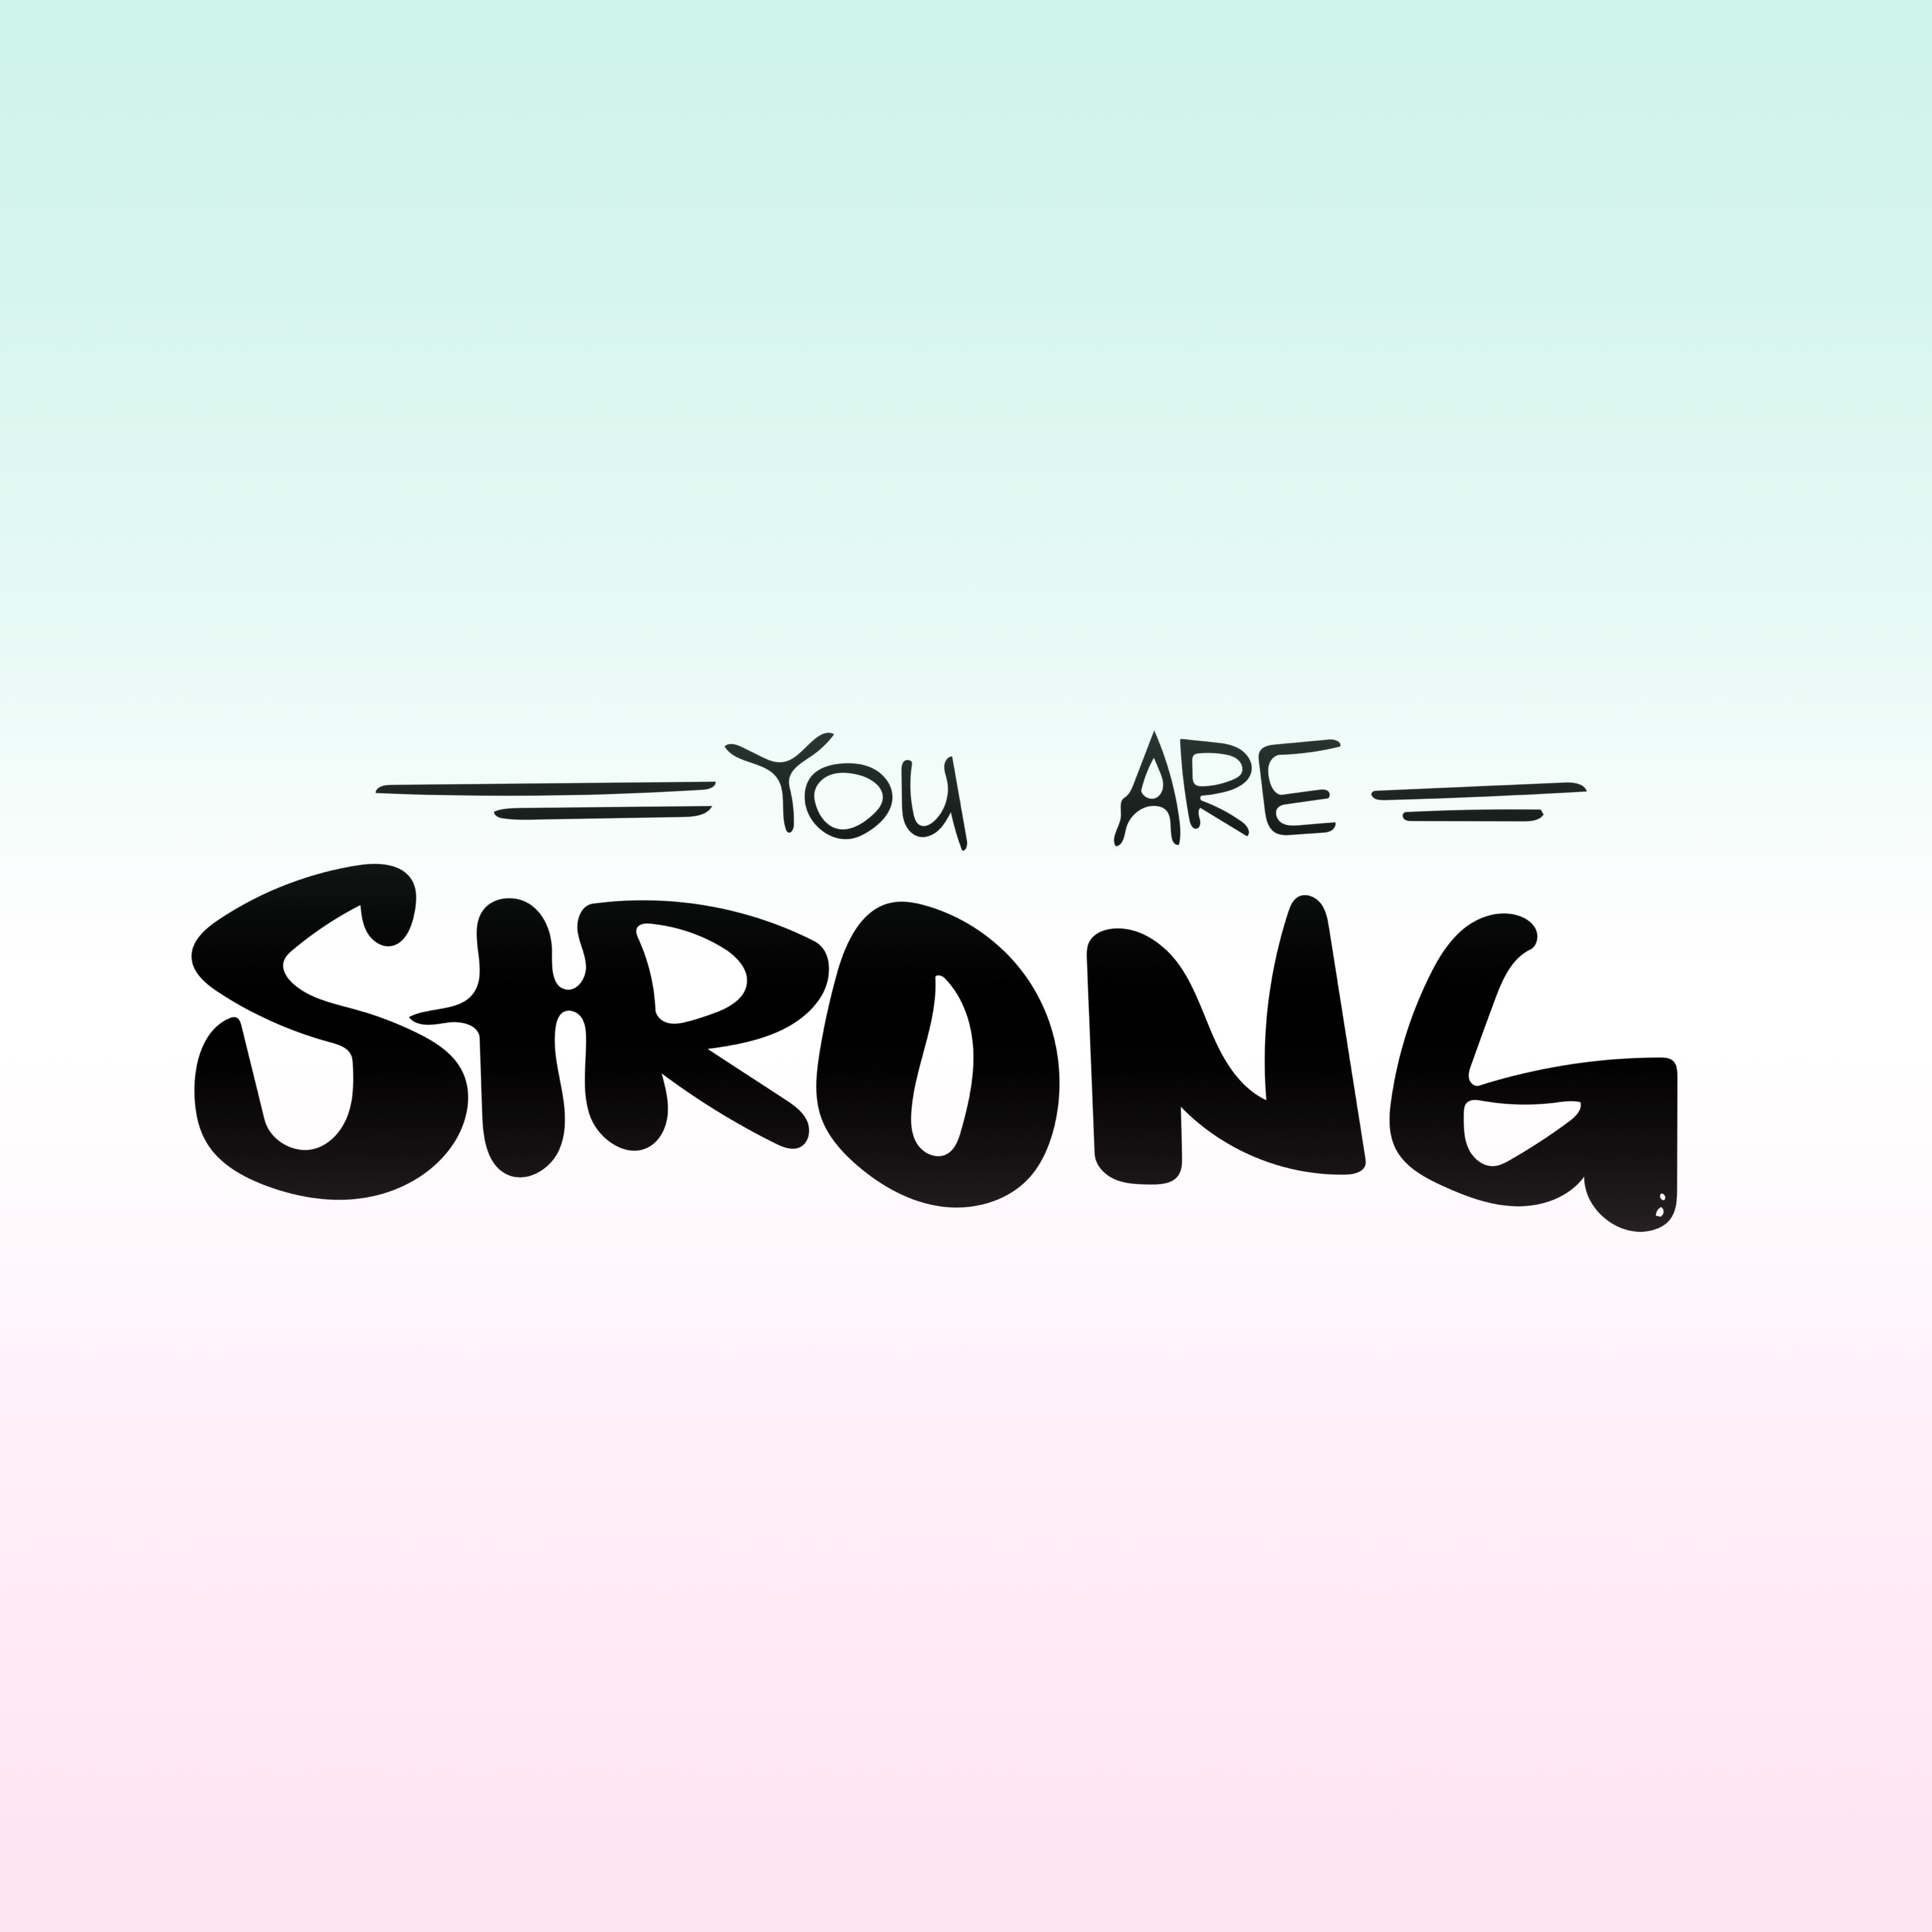 you are strong – Olya Schmidt